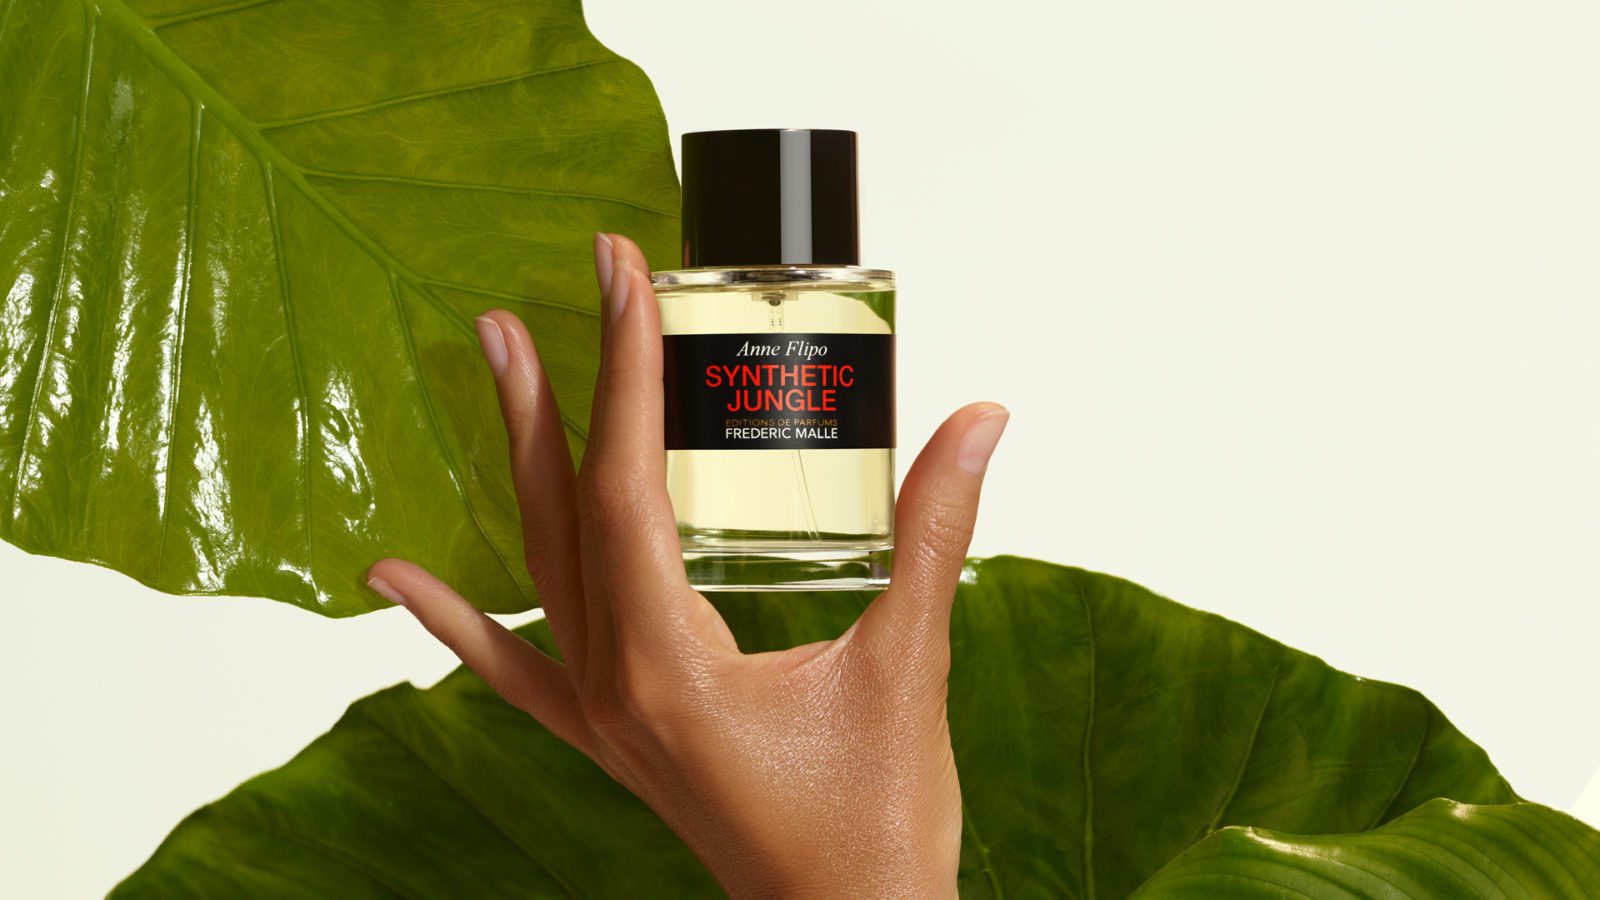 New beauty drops: Frédéric Malle’s new scent, Aesop Parsley Seed Anti-Oxidant Intense Serum & more